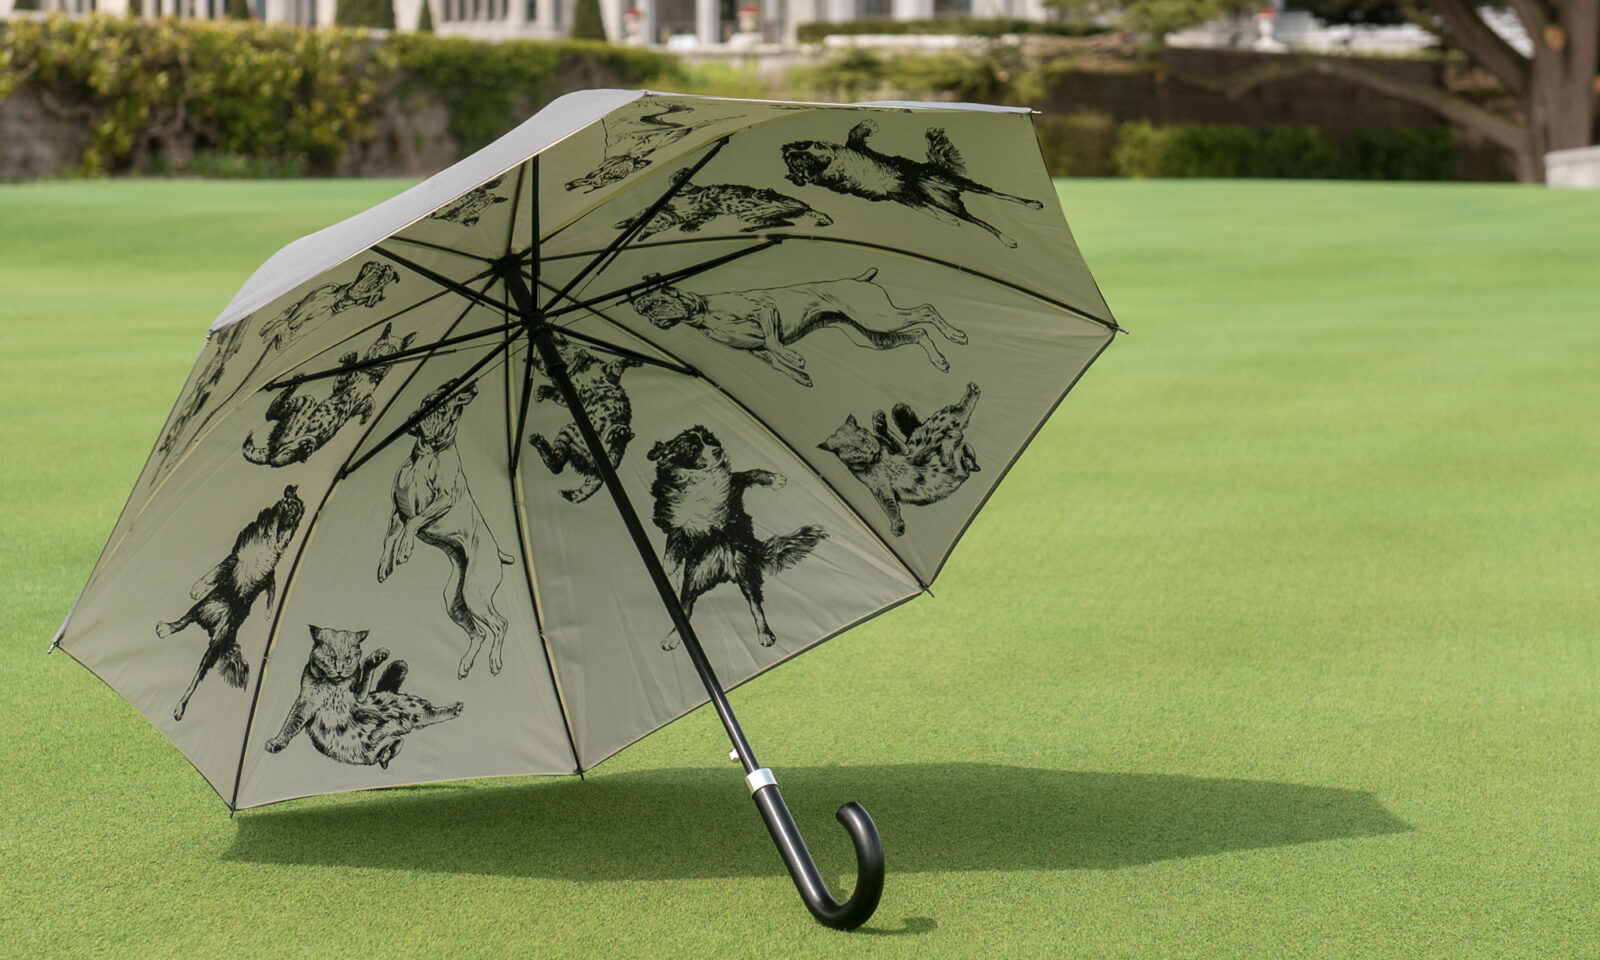 Adare Manor inside of an umbrella, Neworld for brand strategy, design, packaging, and digital needs